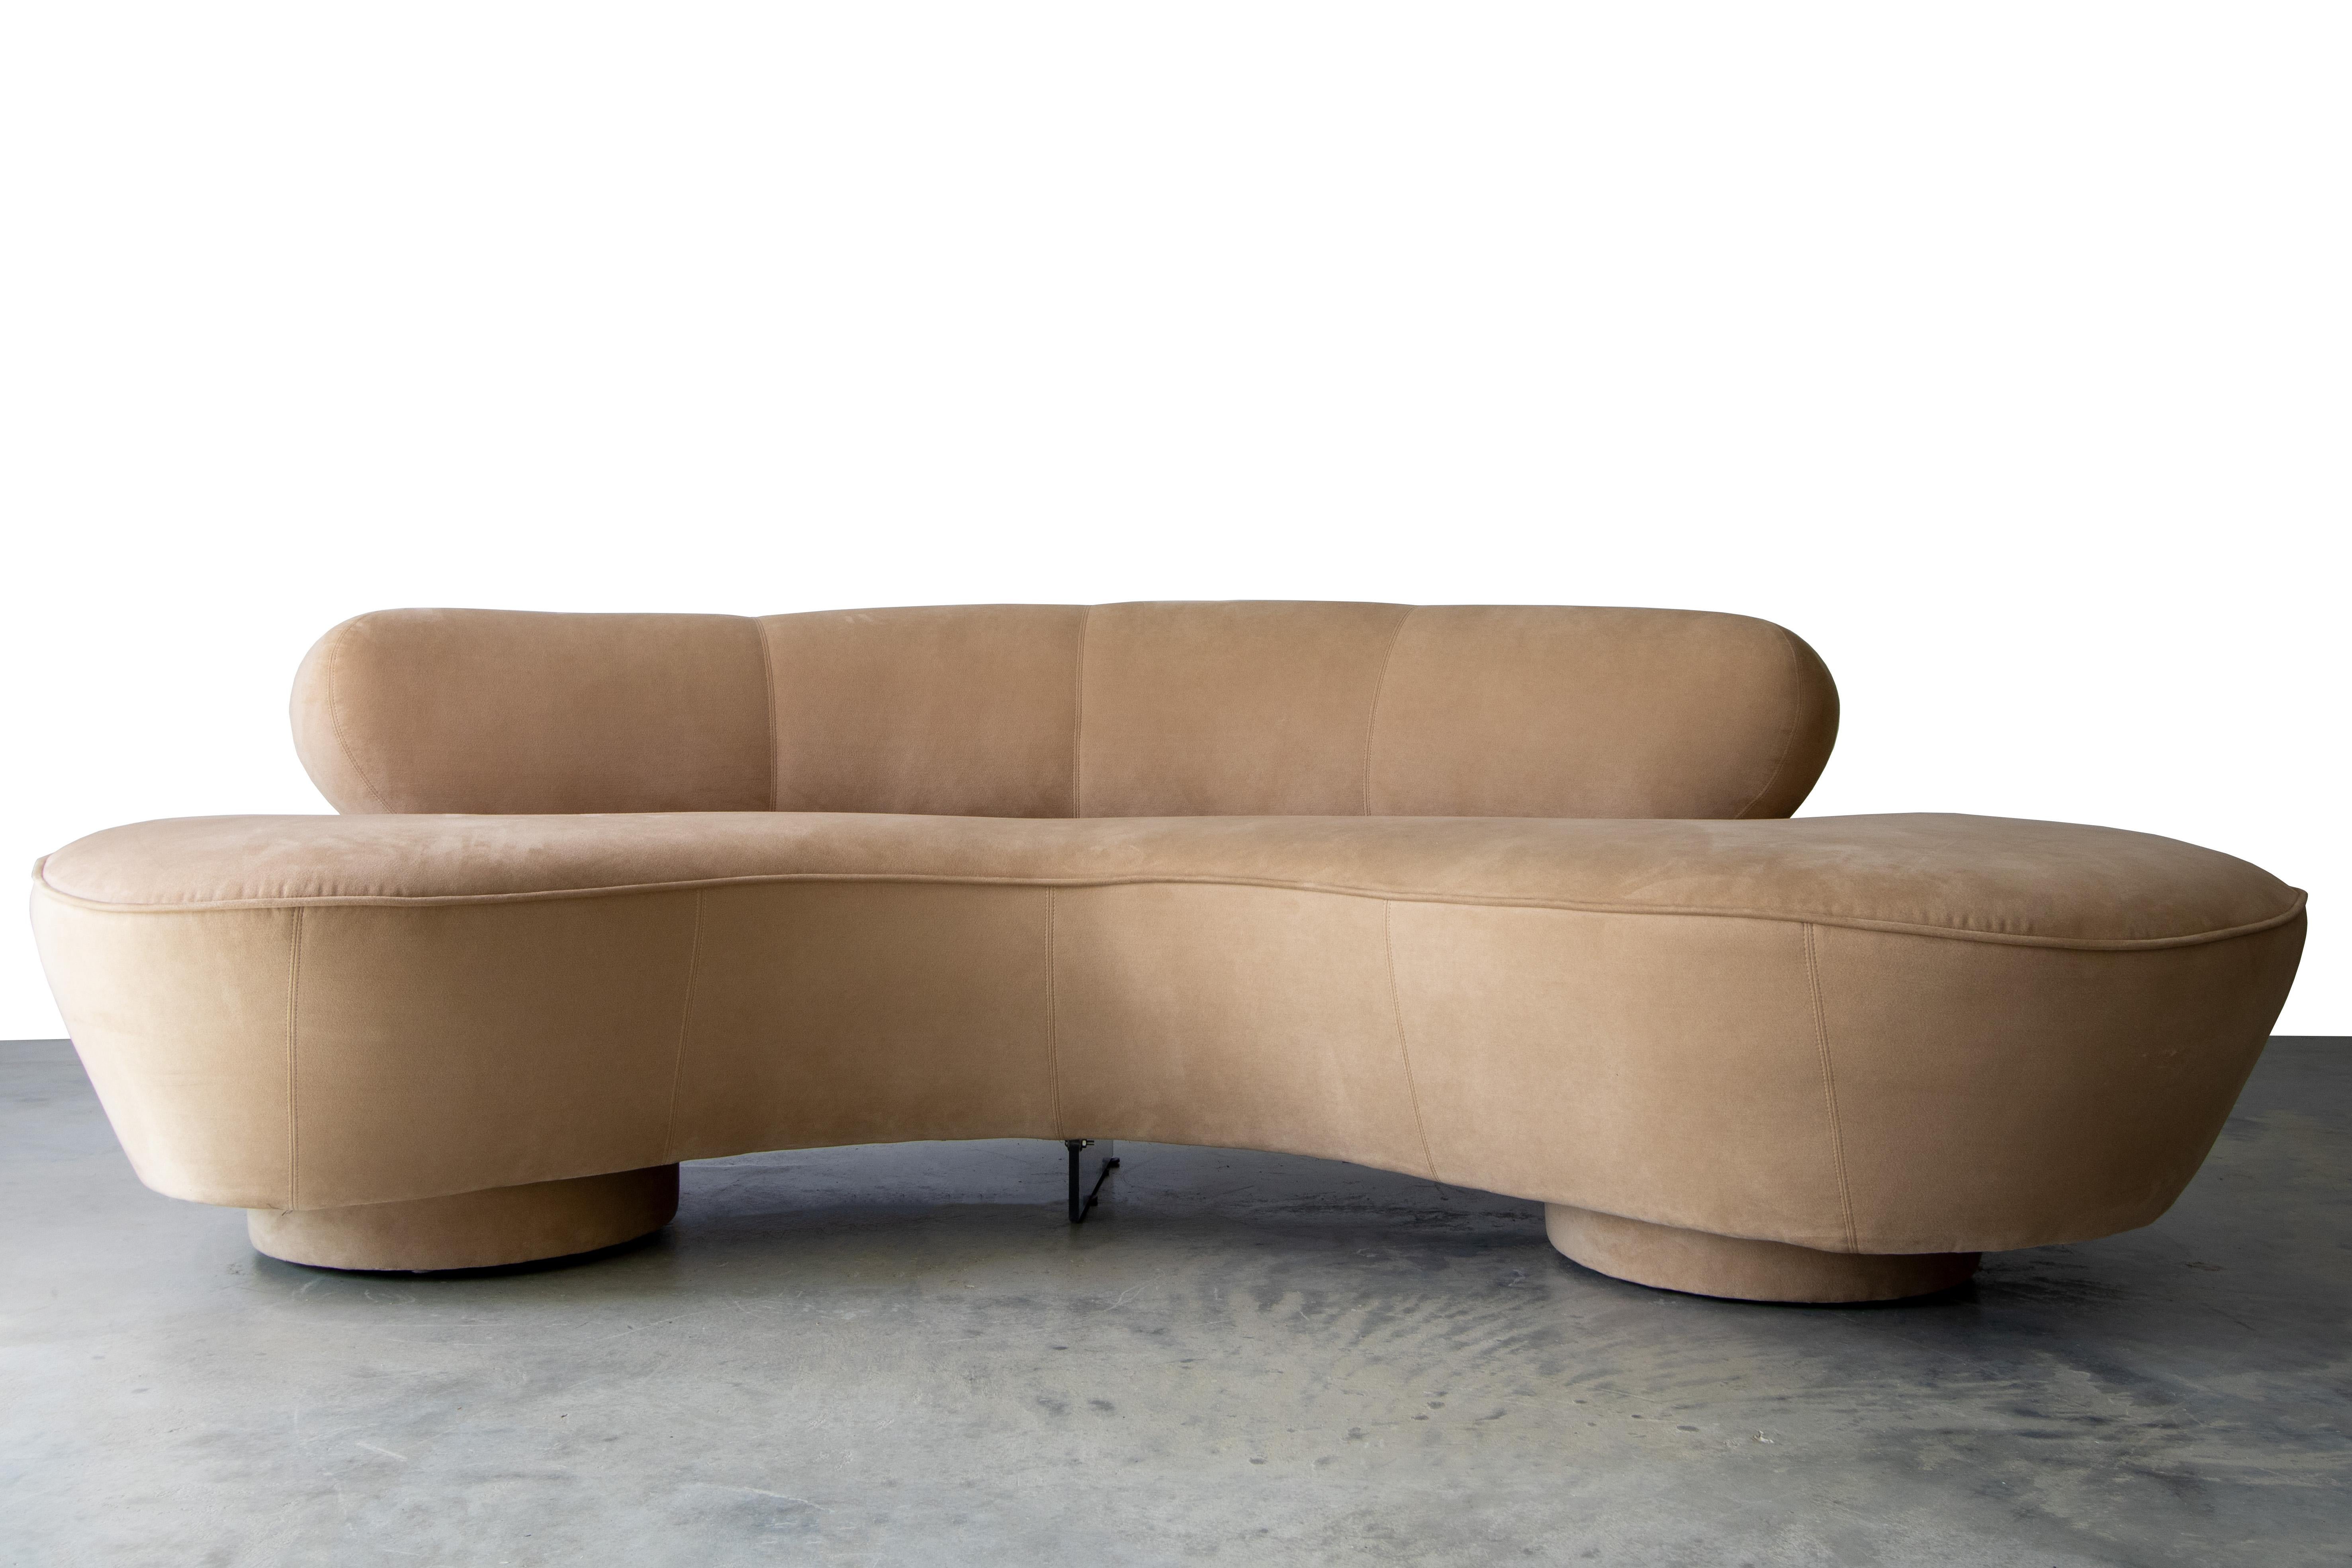 A long island / cloud / serpentine sofa designed by Vladimir Kagan for Directional USA. Circa 2000s. Microfiber fabric shows very well for 20 years old but would shine with new upholstery. Directional Label to the underside.

Dimensions:

29 H ×